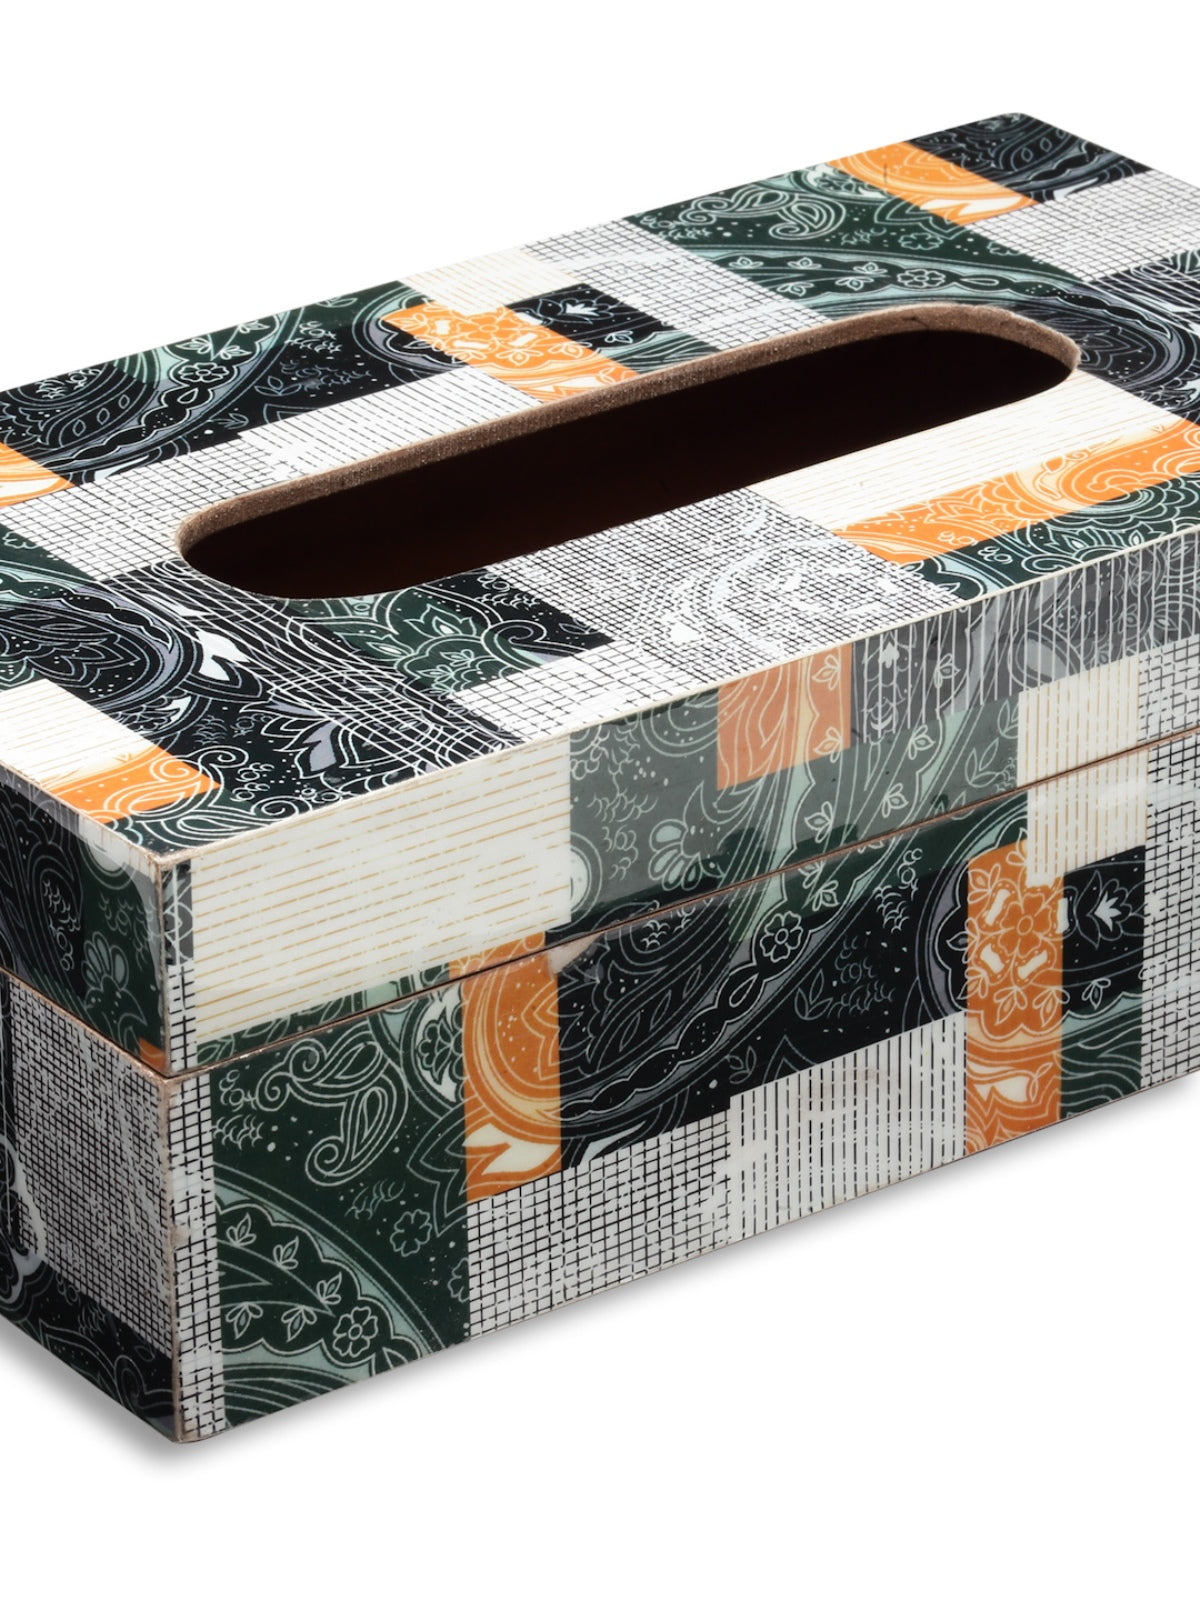 Green Paisley Patterned Wooden Tissue Box Holder